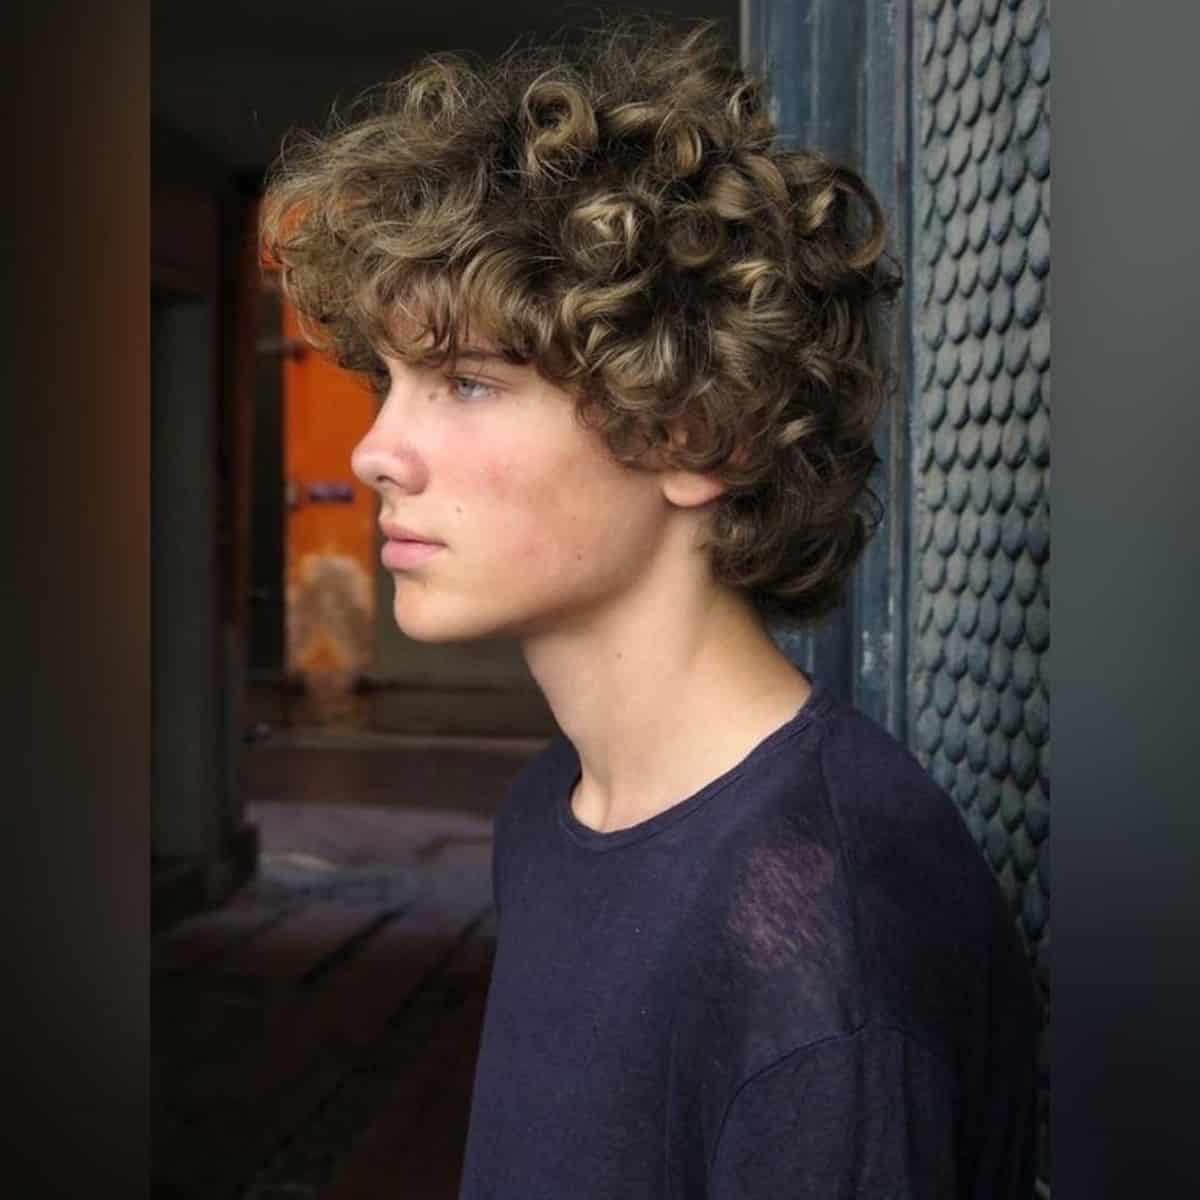 Shaggy curls and waves for men